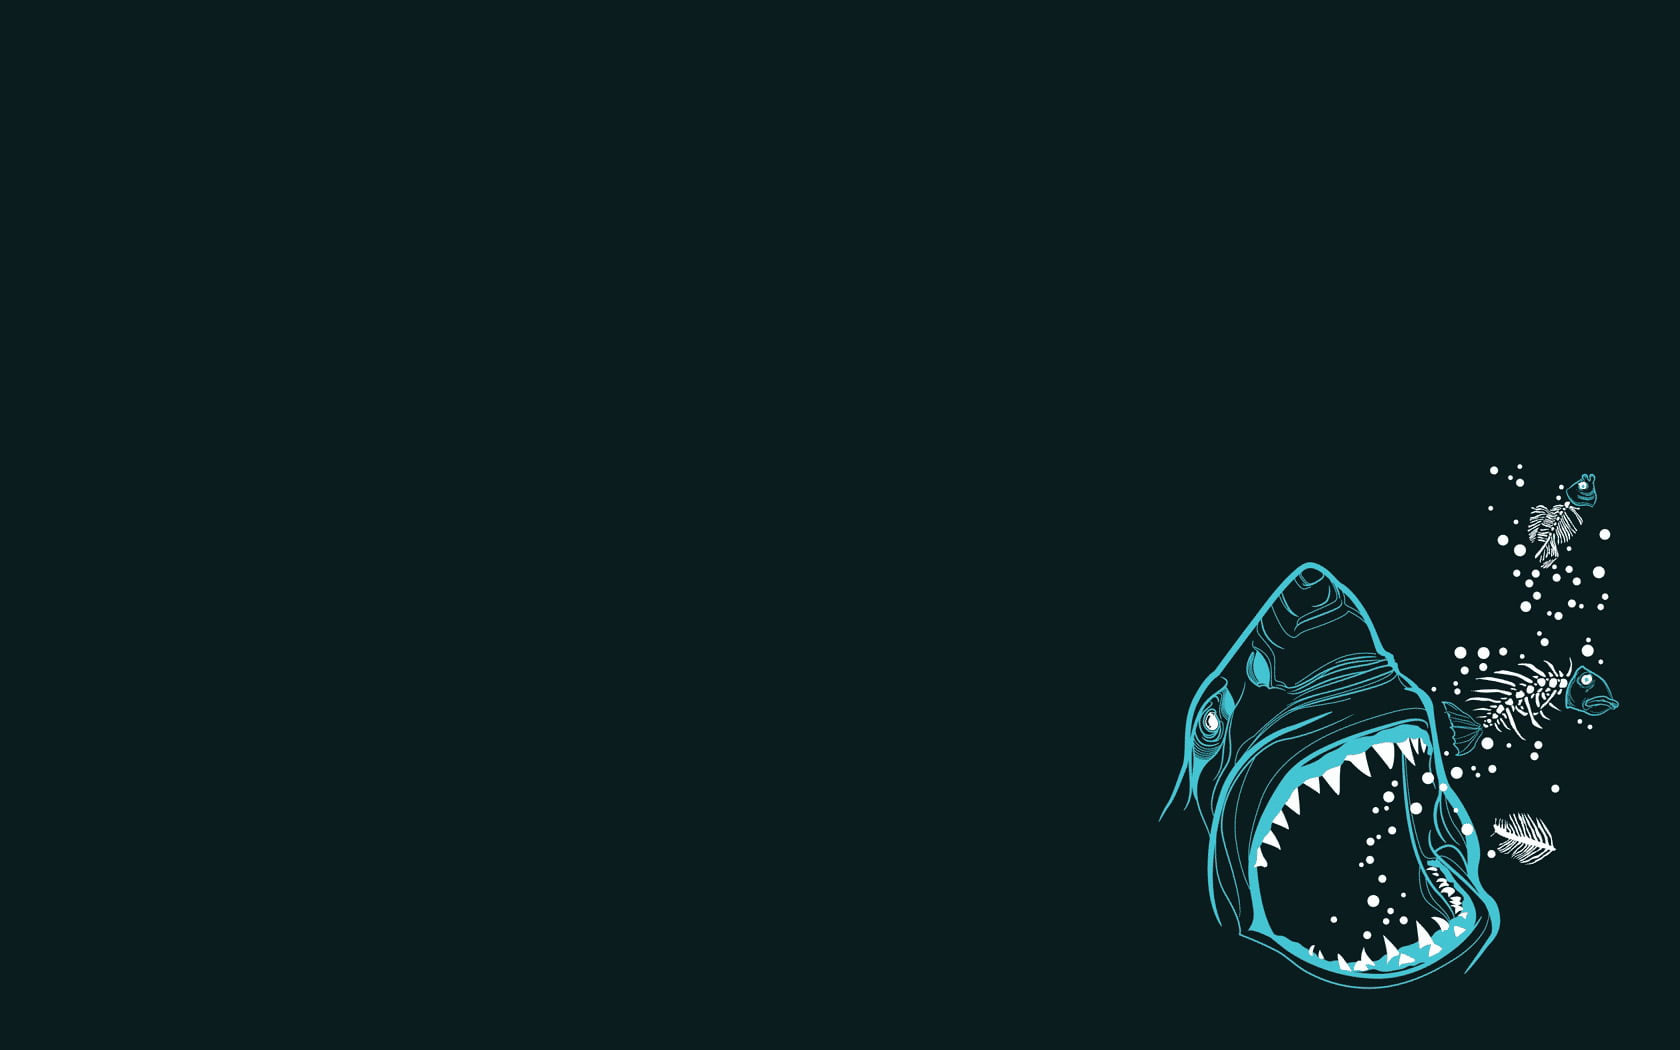 Minimalist Whale Wallpapers